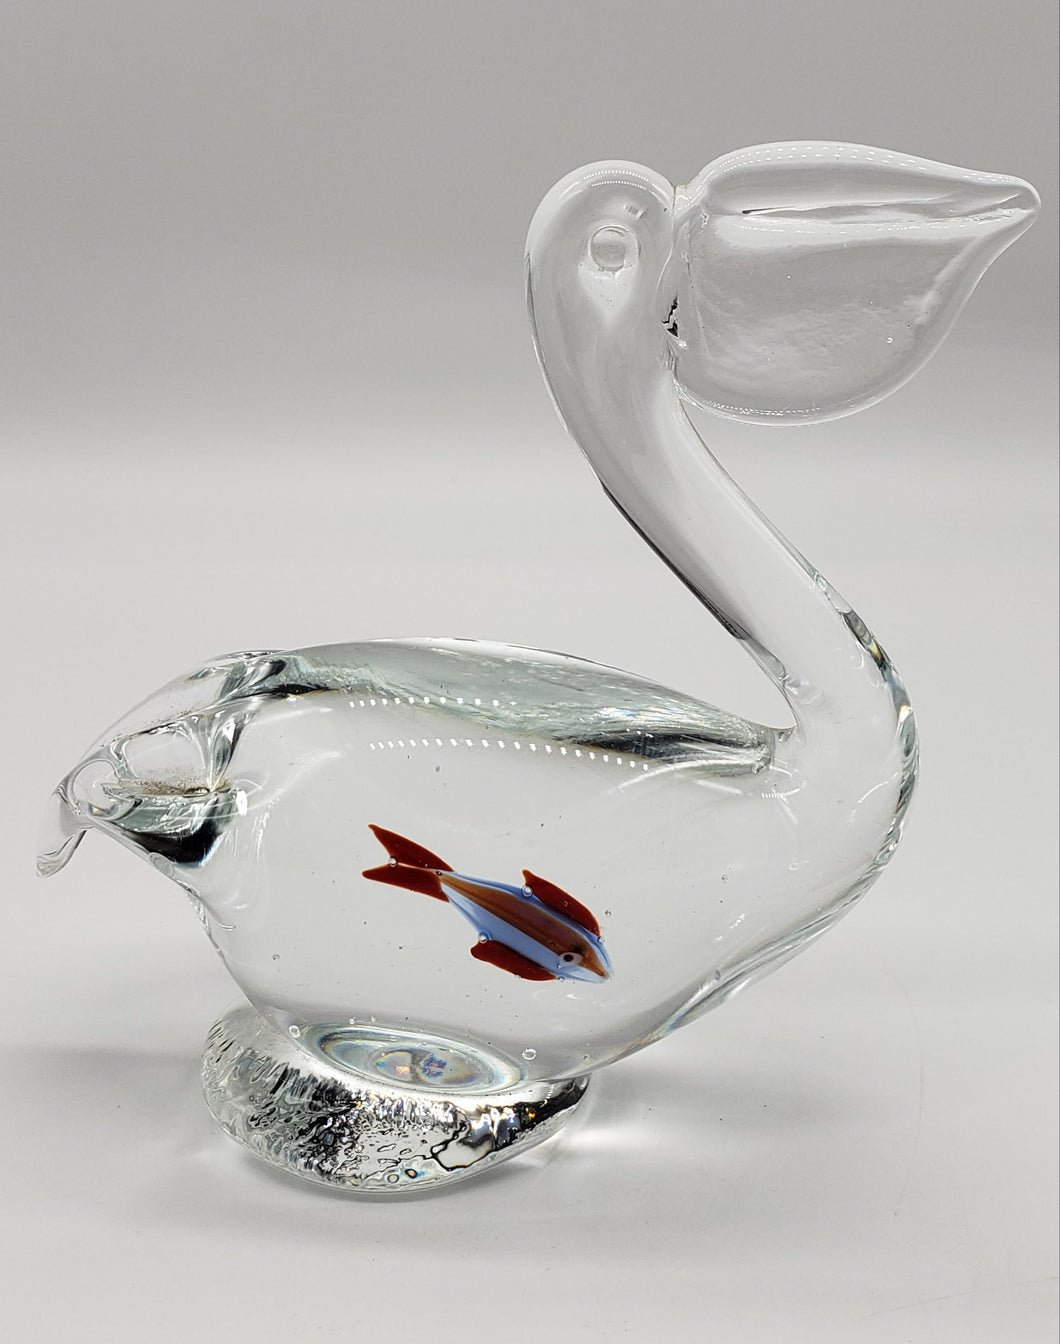 Clear Glass Pelican Paper wieght with Fish Inside Belly Figurine 5 3/4